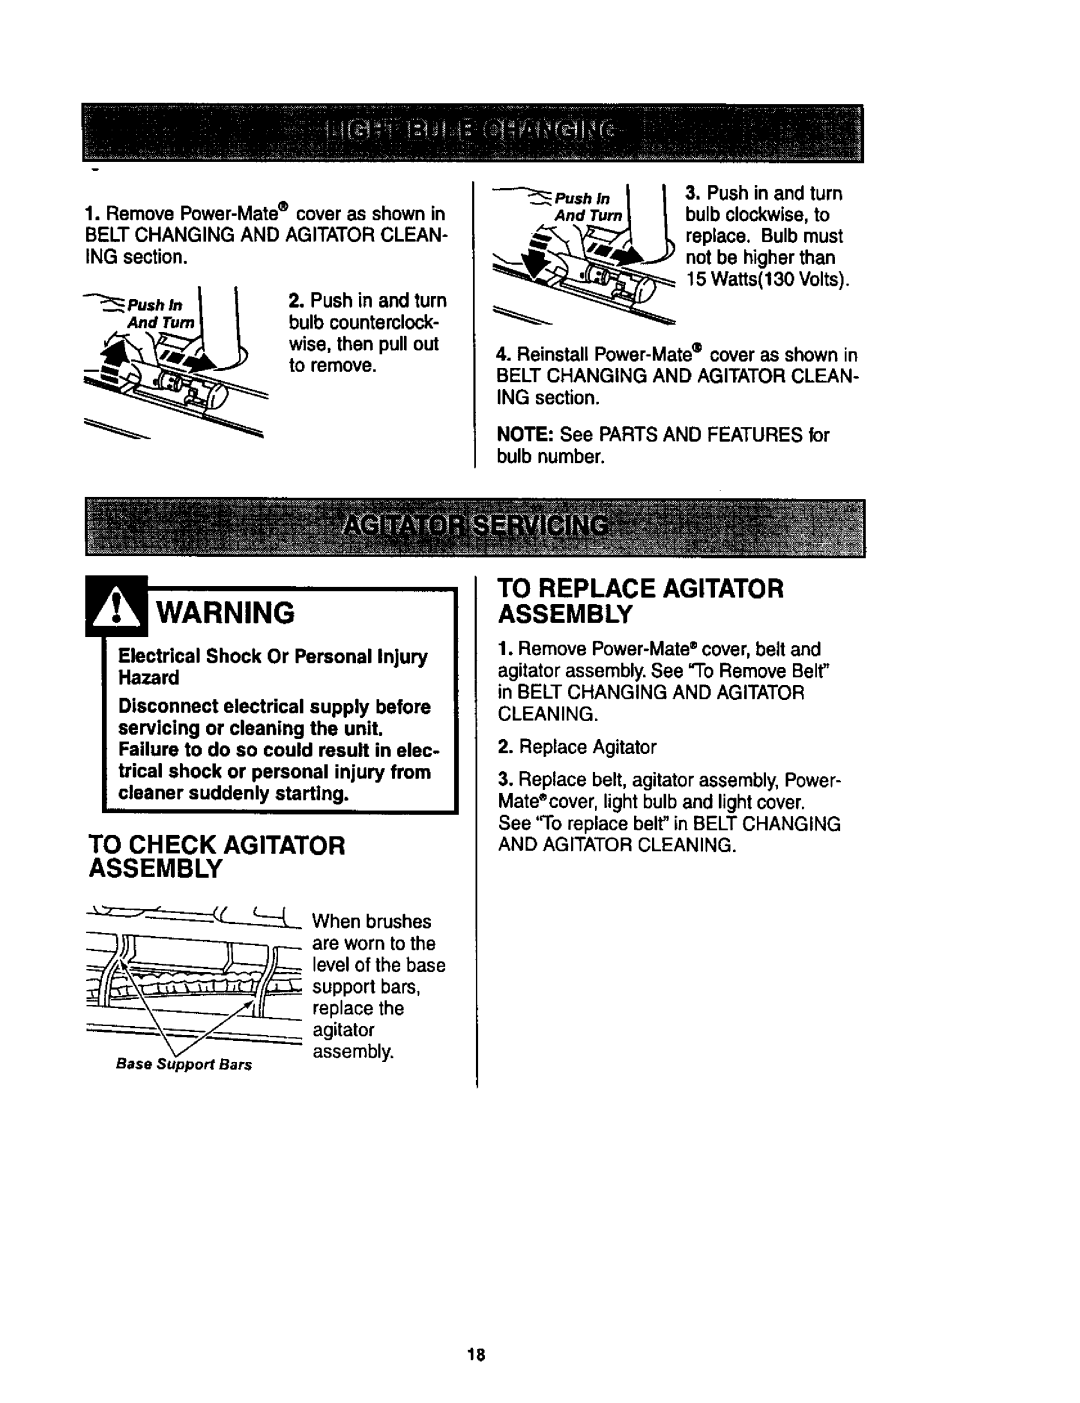 Kenmore 614, 624 owner manual To Check Agitator Assembly, To Replace Agitator Assembly, II 3. Push in and turn 